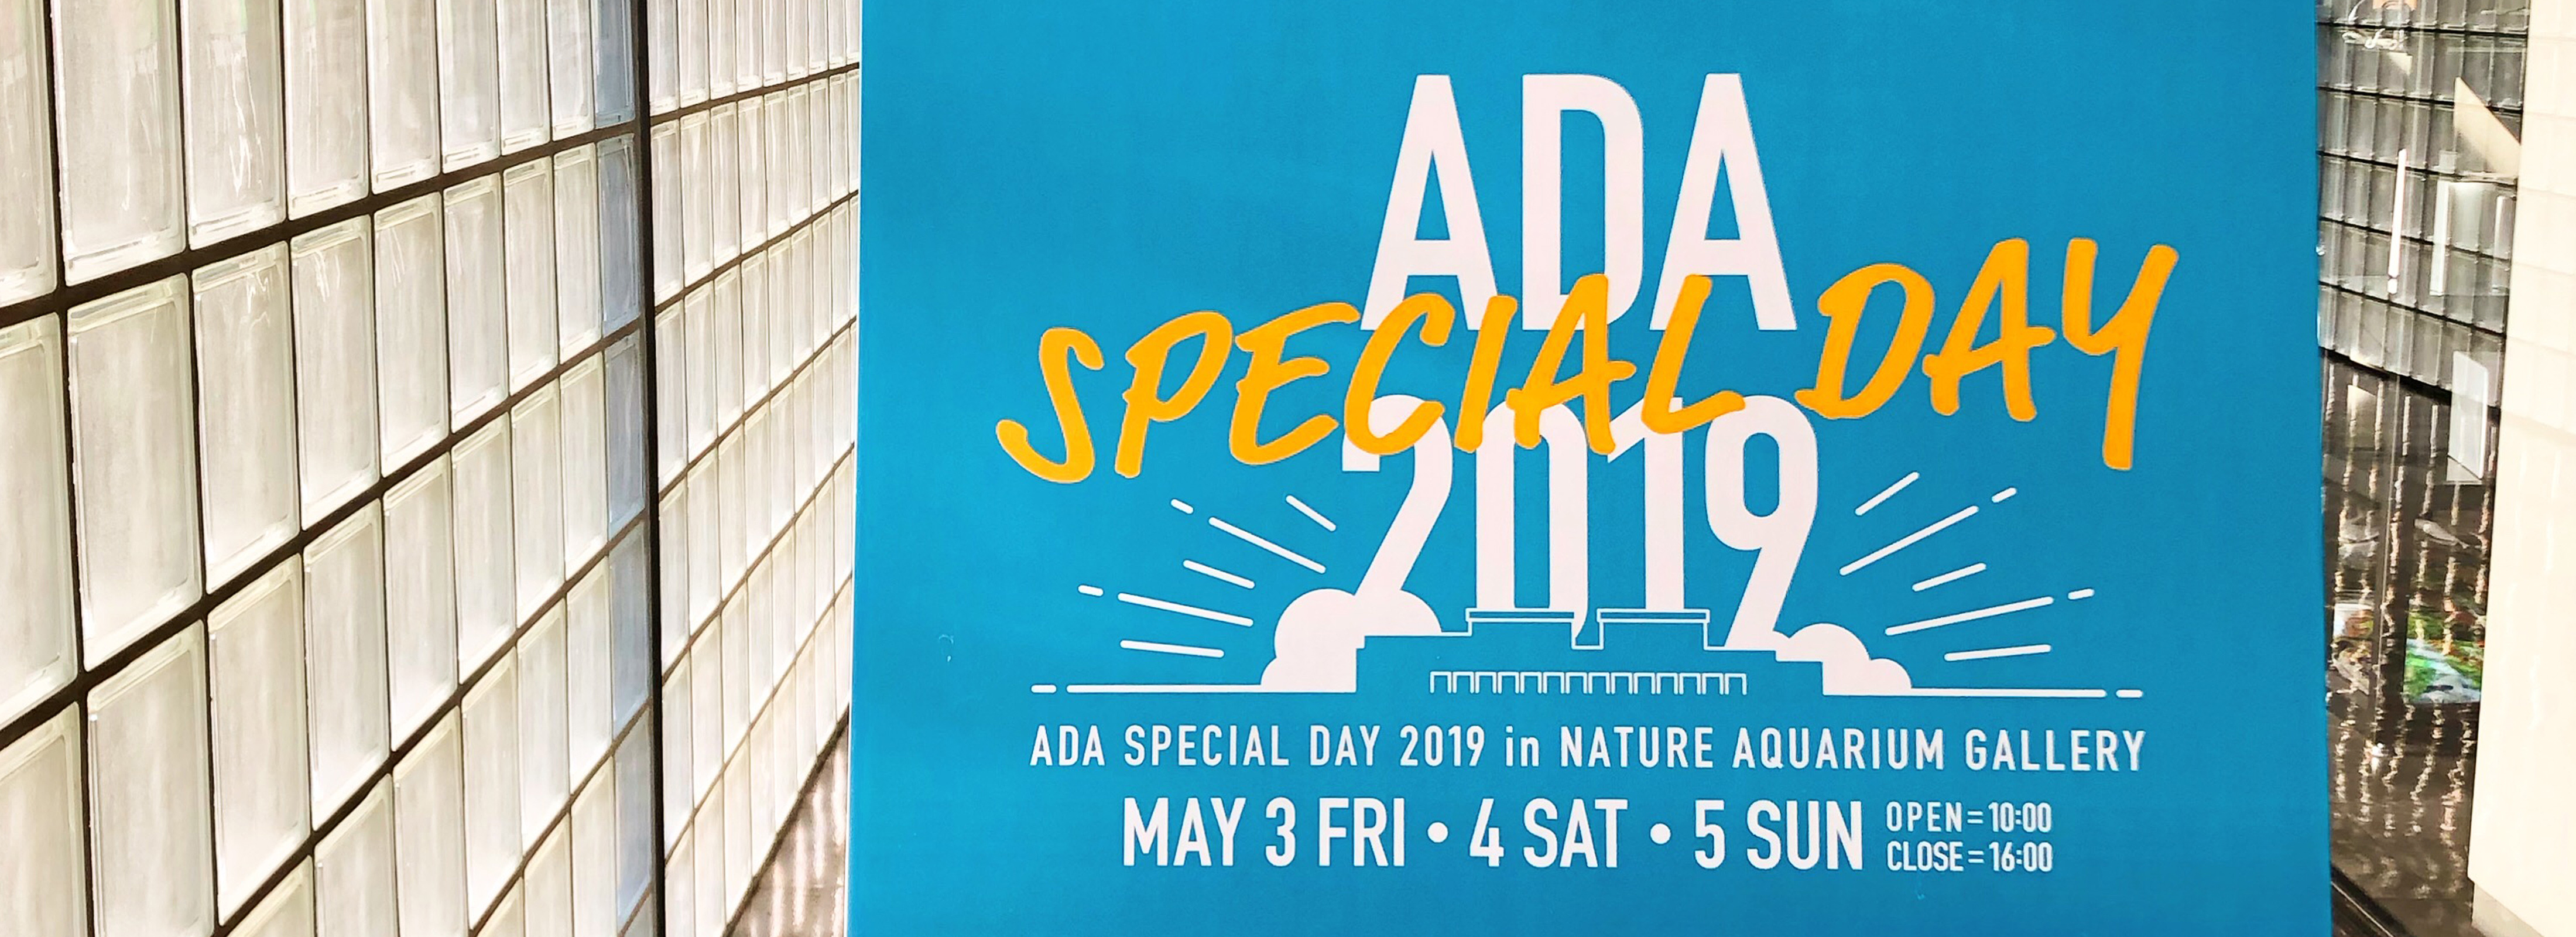 ADA SPECIAL DAY 2019 REPORT